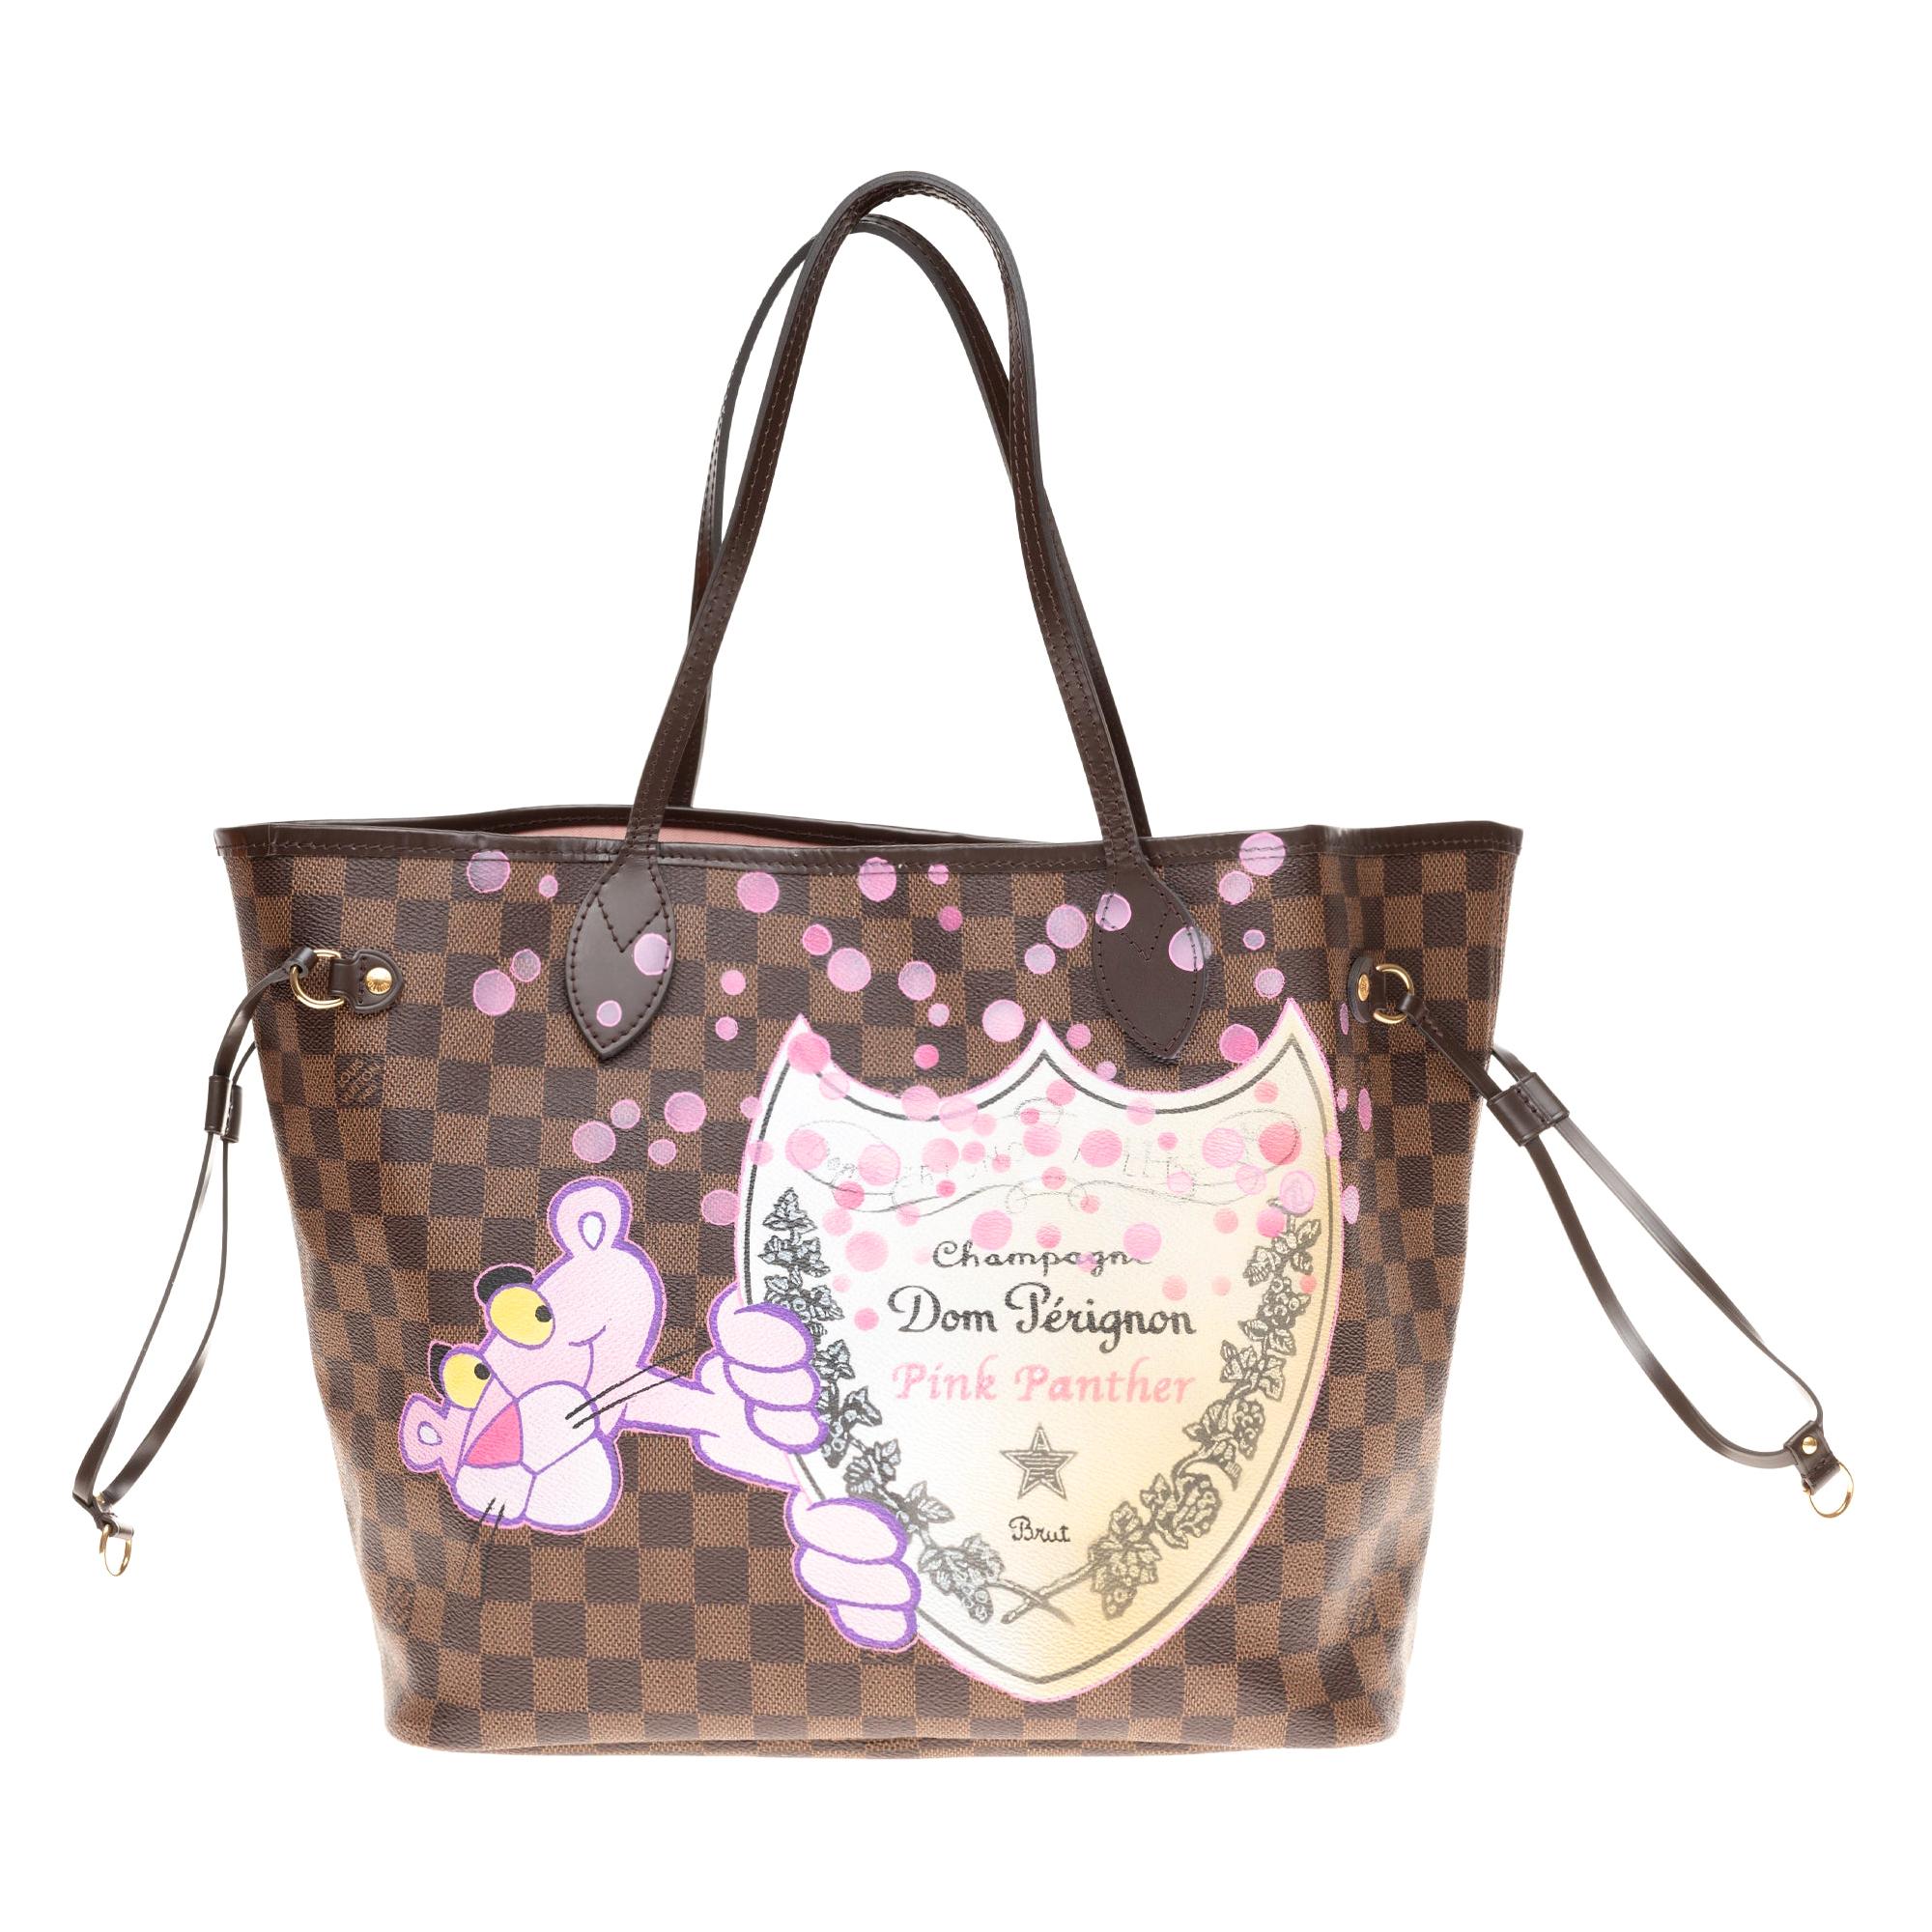 Neverfull MM handbag canvas with pouch customized "Pink Panther&Bubbles"